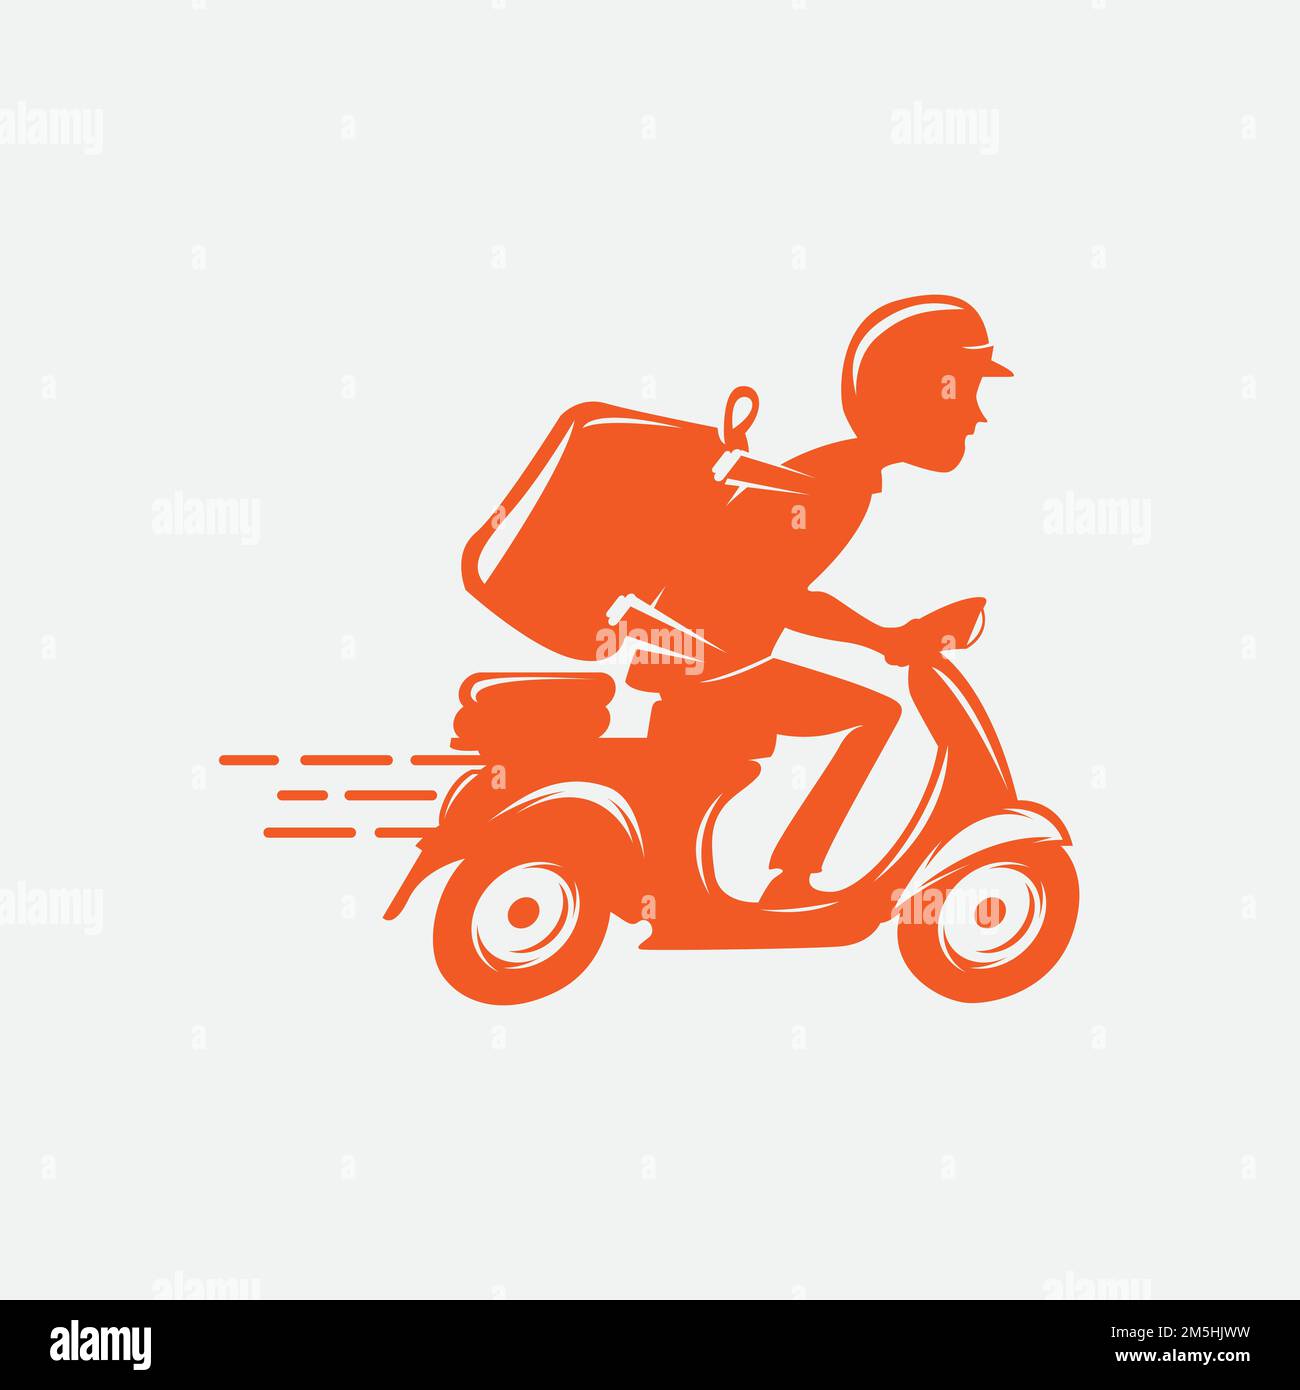 Express Ground Postal Service by Scooter Concept, Courier Service Man Vector Icon Design.EPS 10 Stock Vector